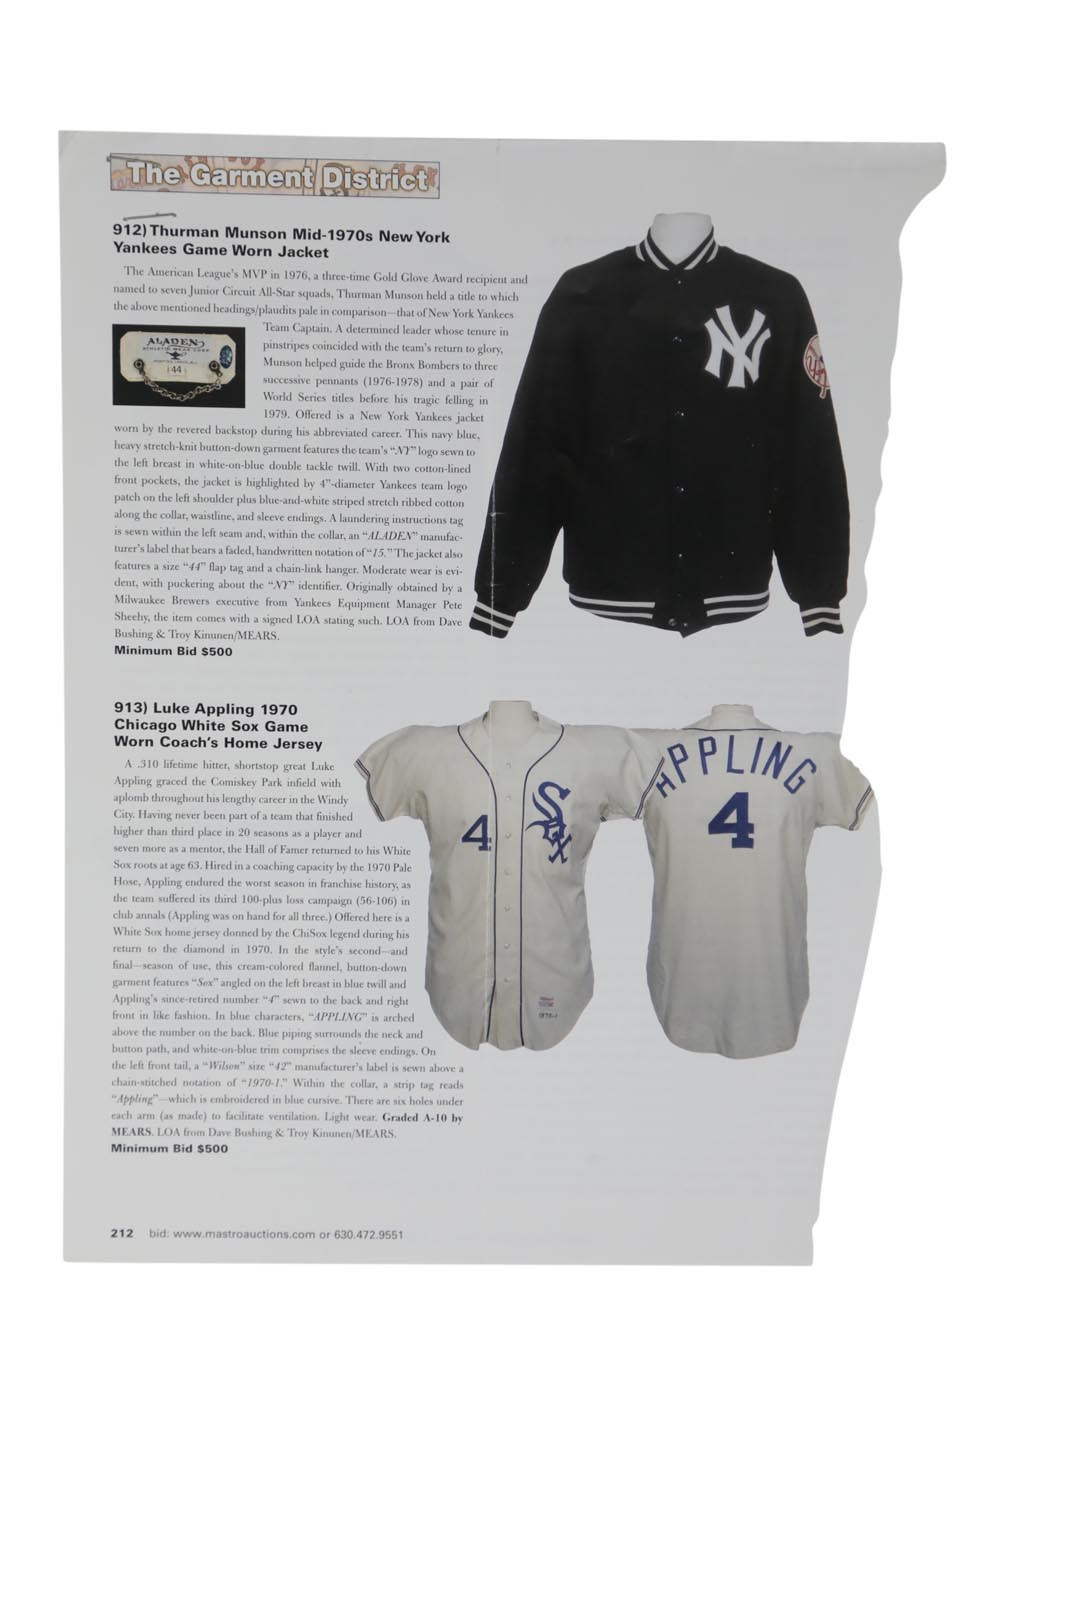 Game Worn Guide to New York Yankees Jerseys (1970-2020 - Game Worn Guides